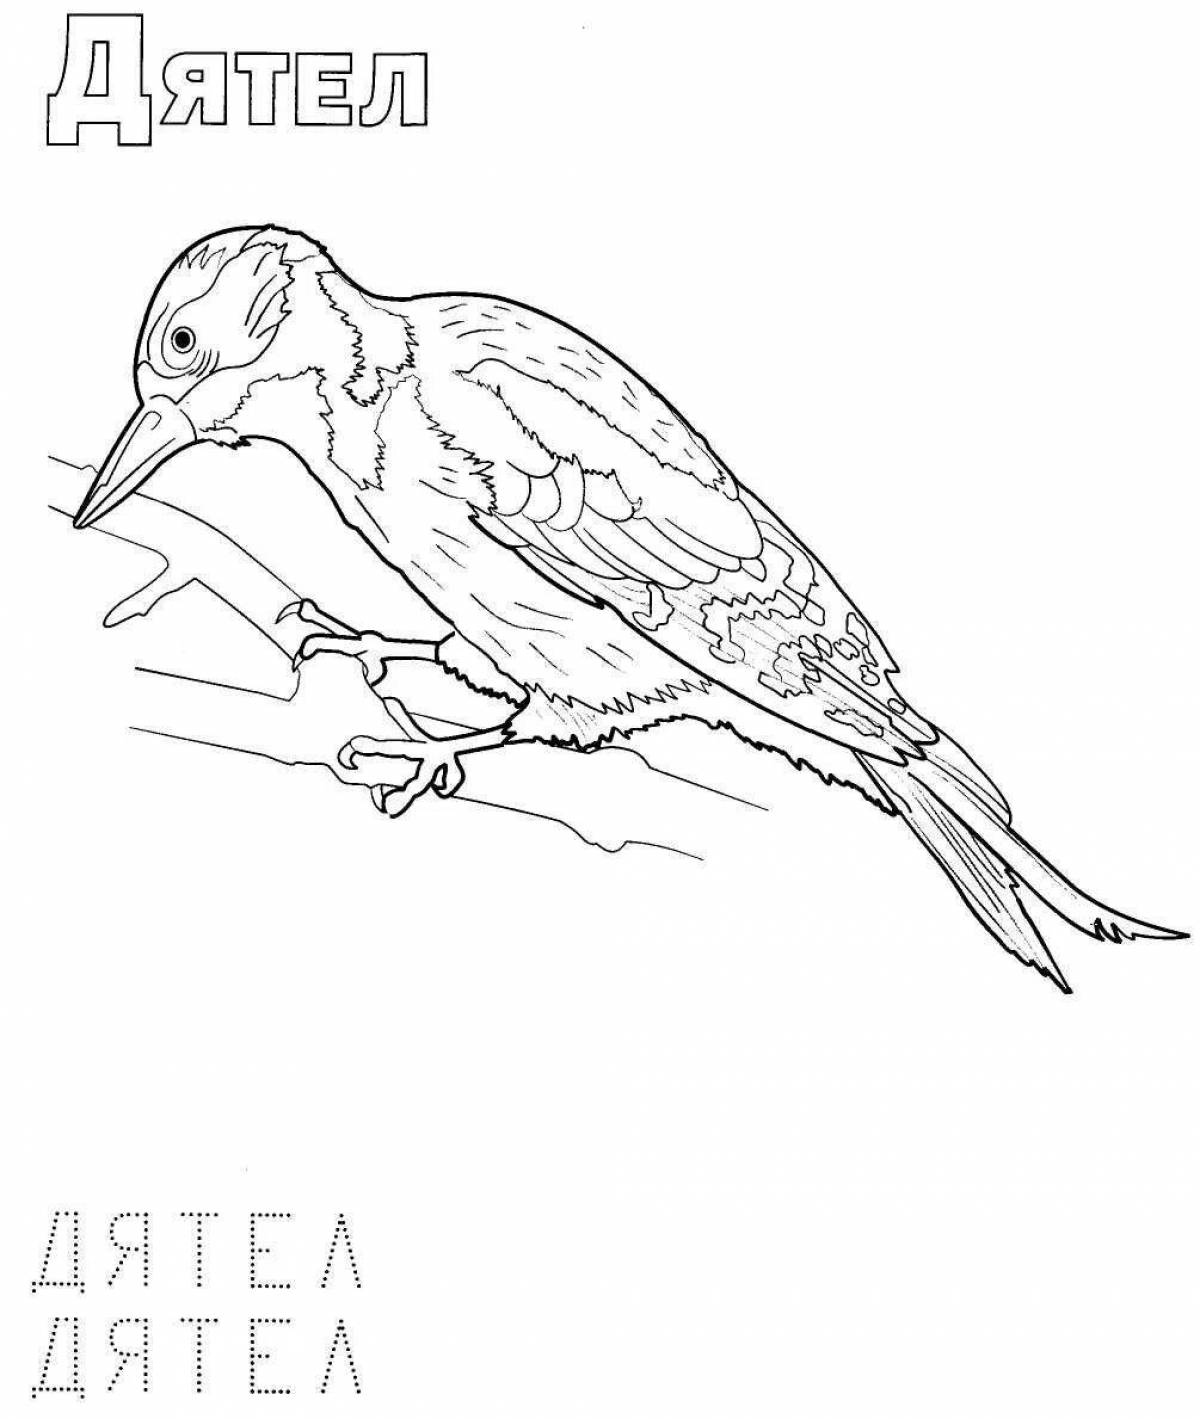 Fabulous wintering birds coloring pages for preschoolers